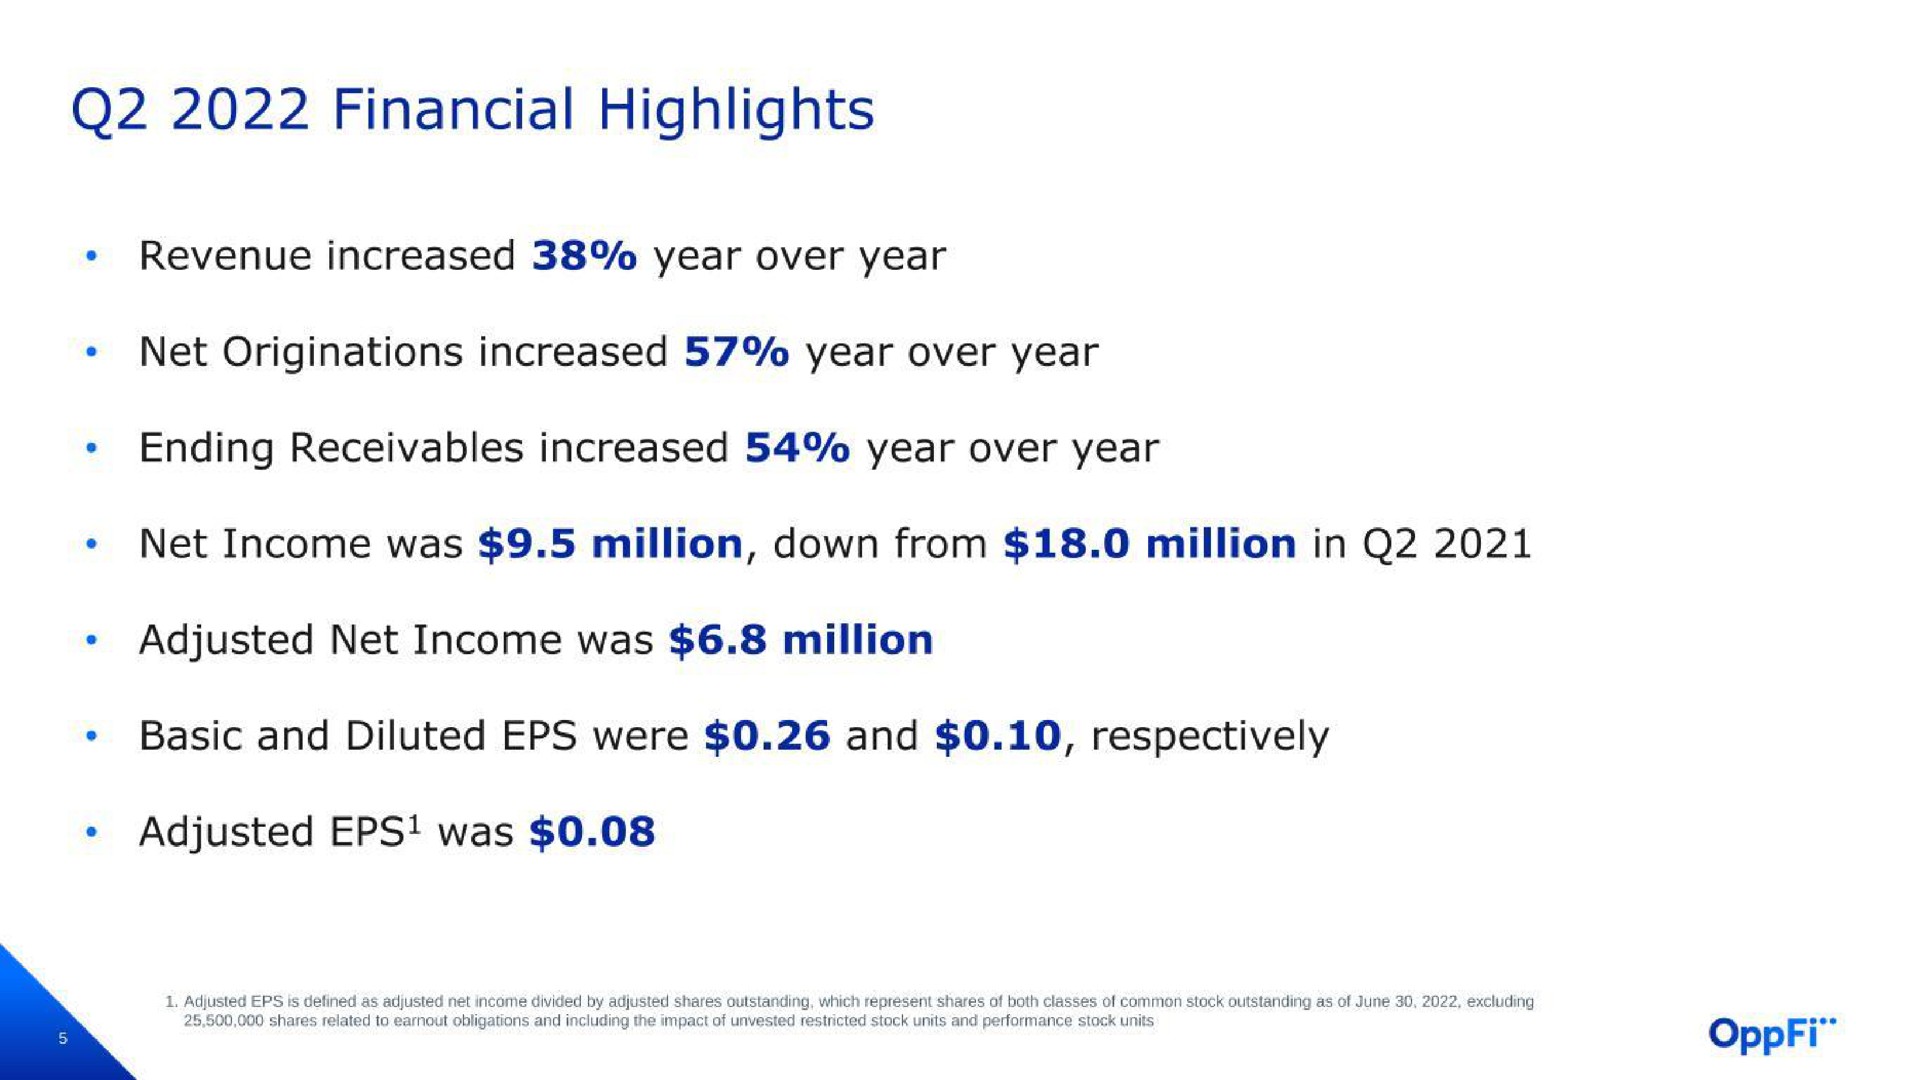 financial highlights revenue increased year over year net originations increased year over year ending receivables increased year over year net income was million down from million in adjusted net income was million basic and diluted were and respectively adjusted was | OppFi